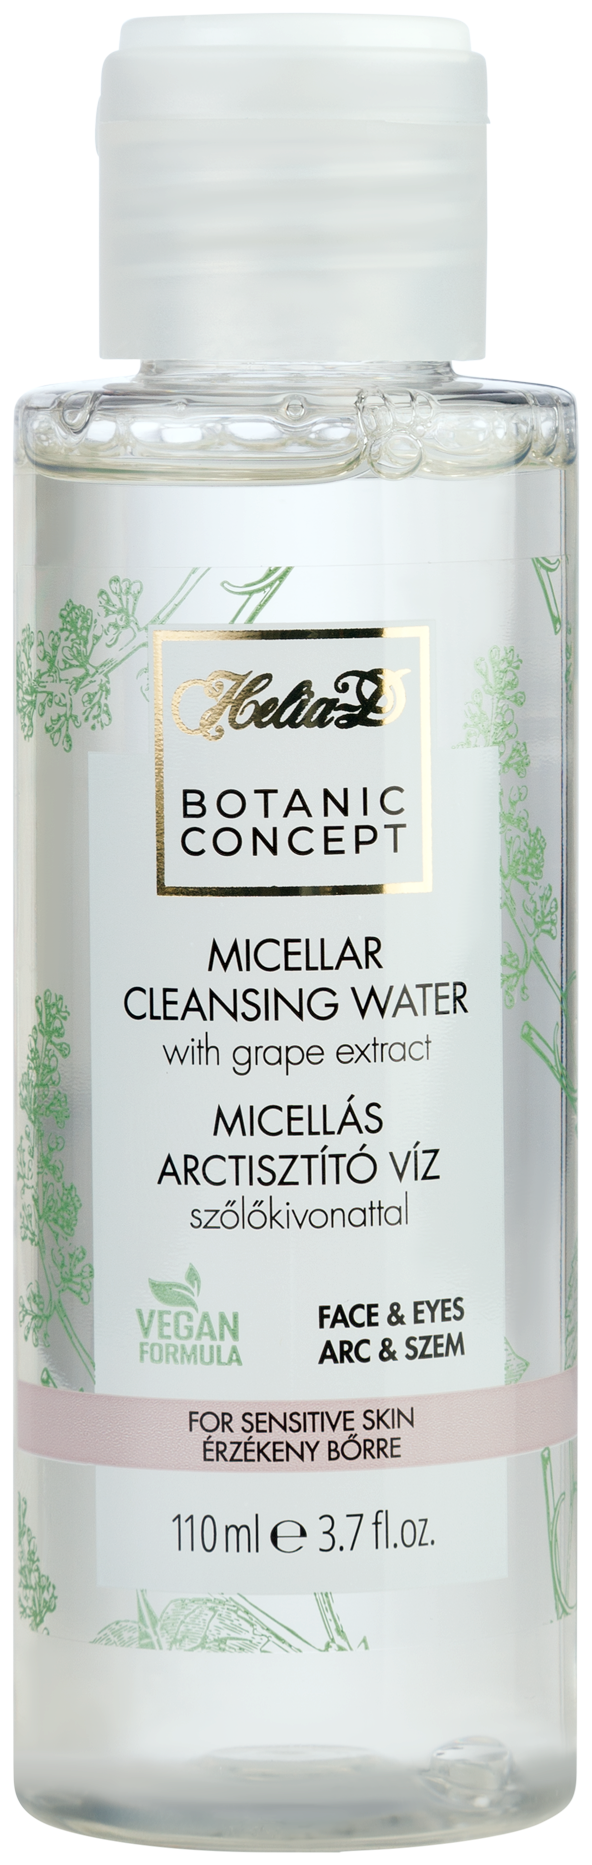 Helia-D Botanic Concept Micellar Cleansing Water With Grape Extract  110 ml